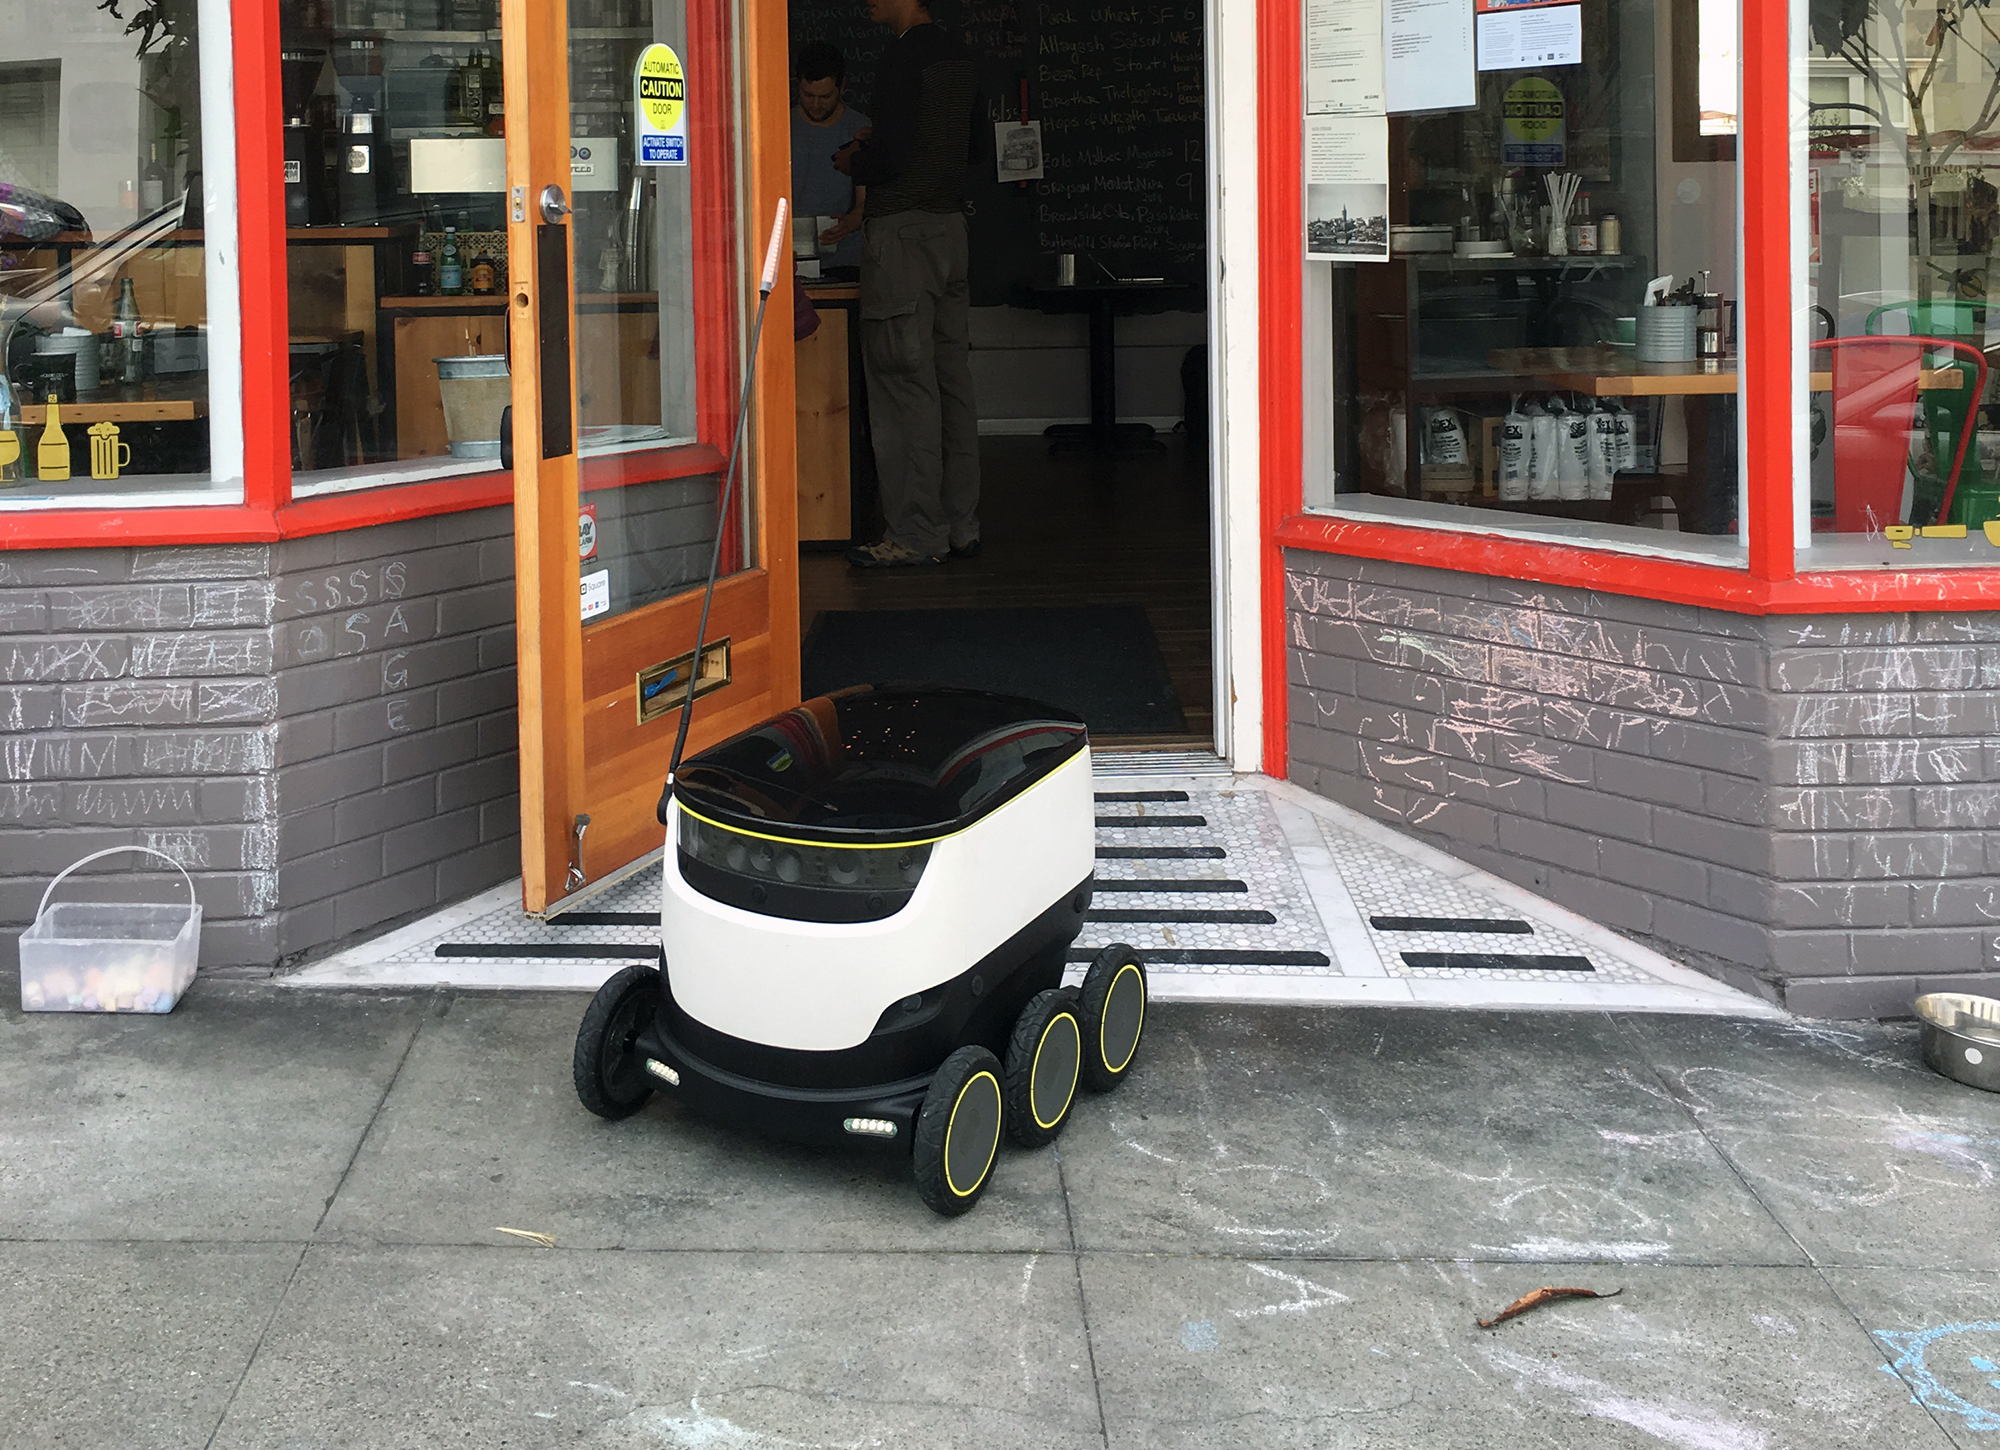 Starship Technology’s “friendly sidewalk robot” leaving Orson's Belly Cafe on Tuesday to make a delivery